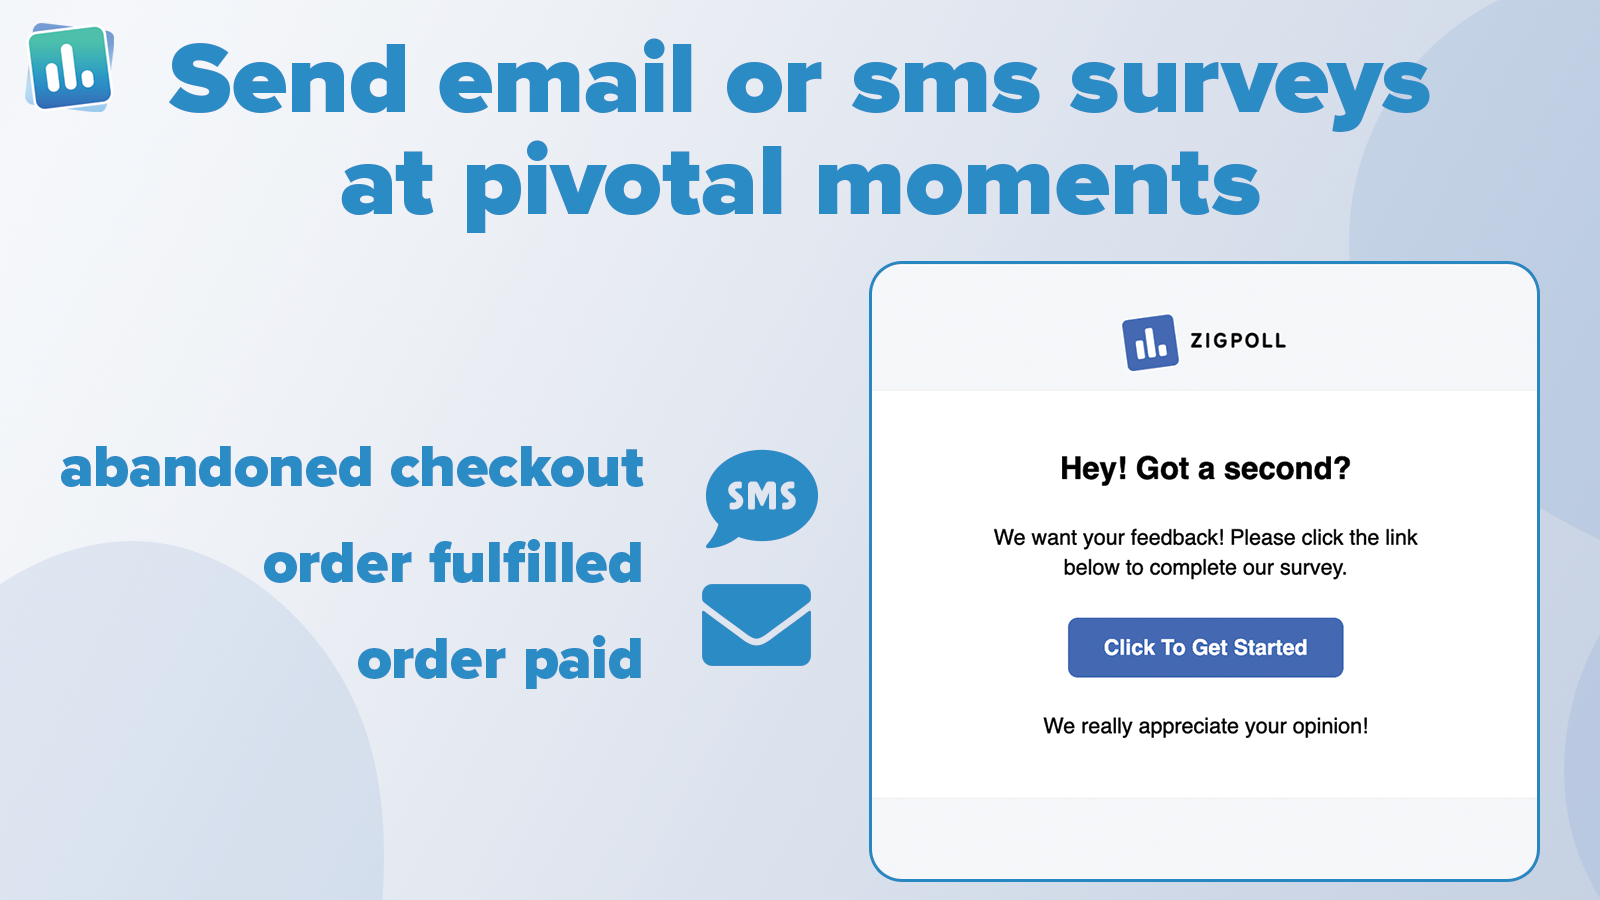 Send email and sms surveys at pivotal moments